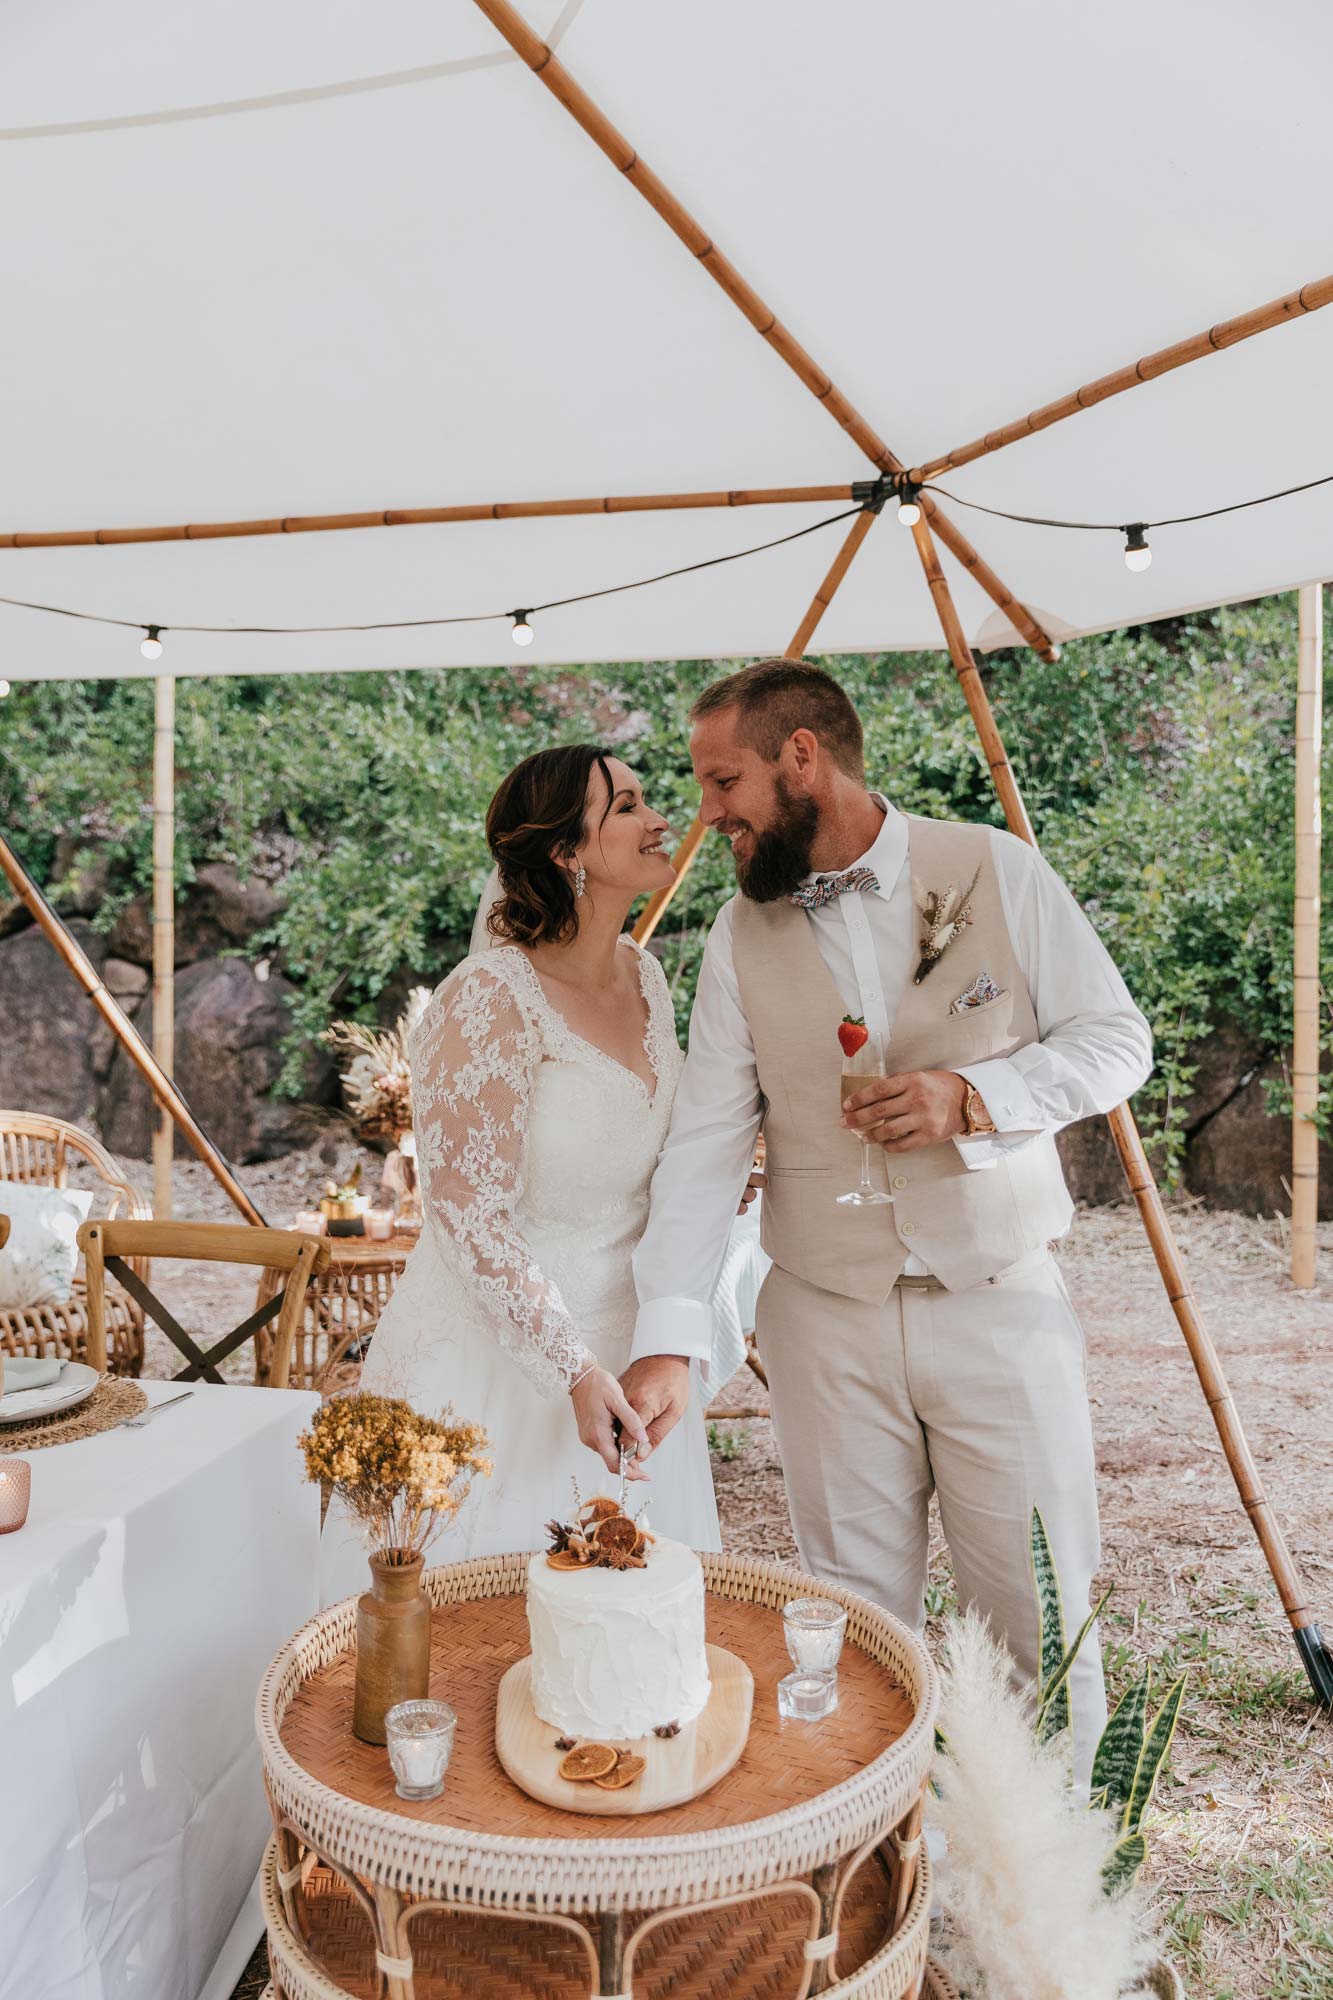 sand and terracotta wedding decor with dried flowers, bride and groom standing in front of basket table in a teepee for a festival style wedding